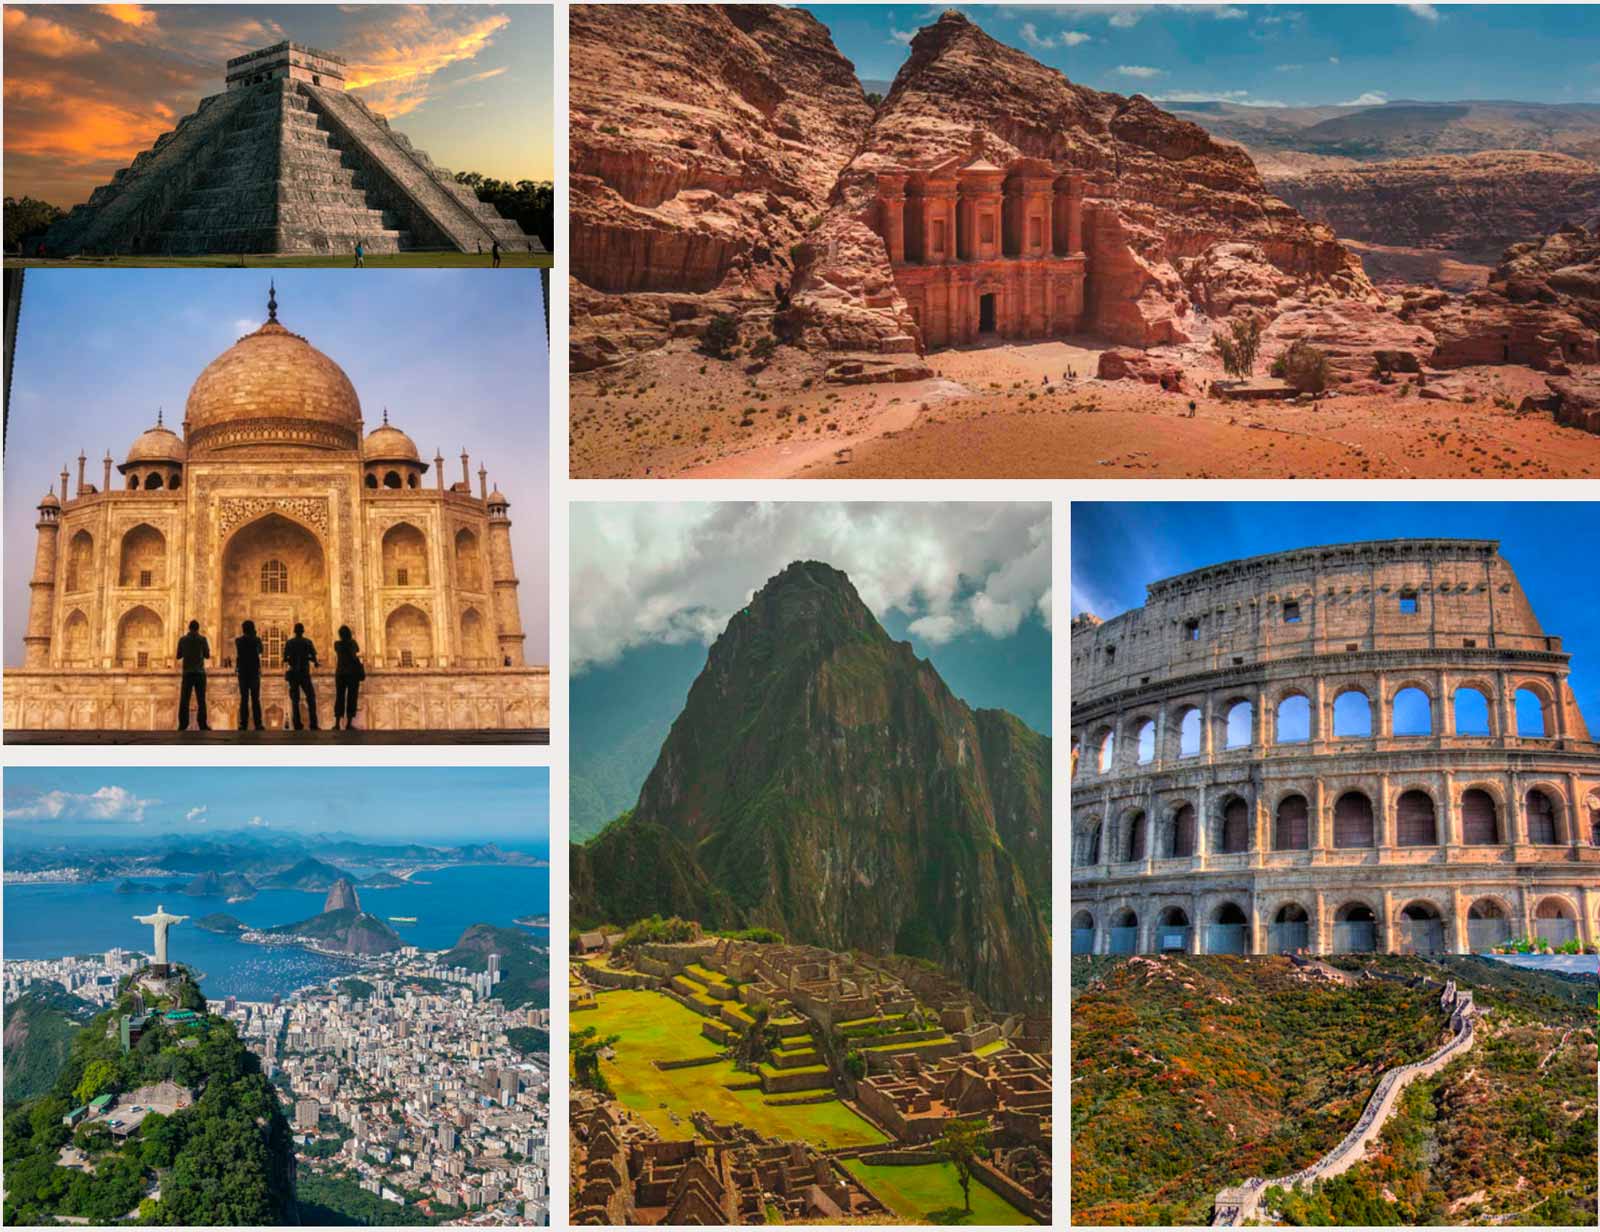 new seven wonders of the world